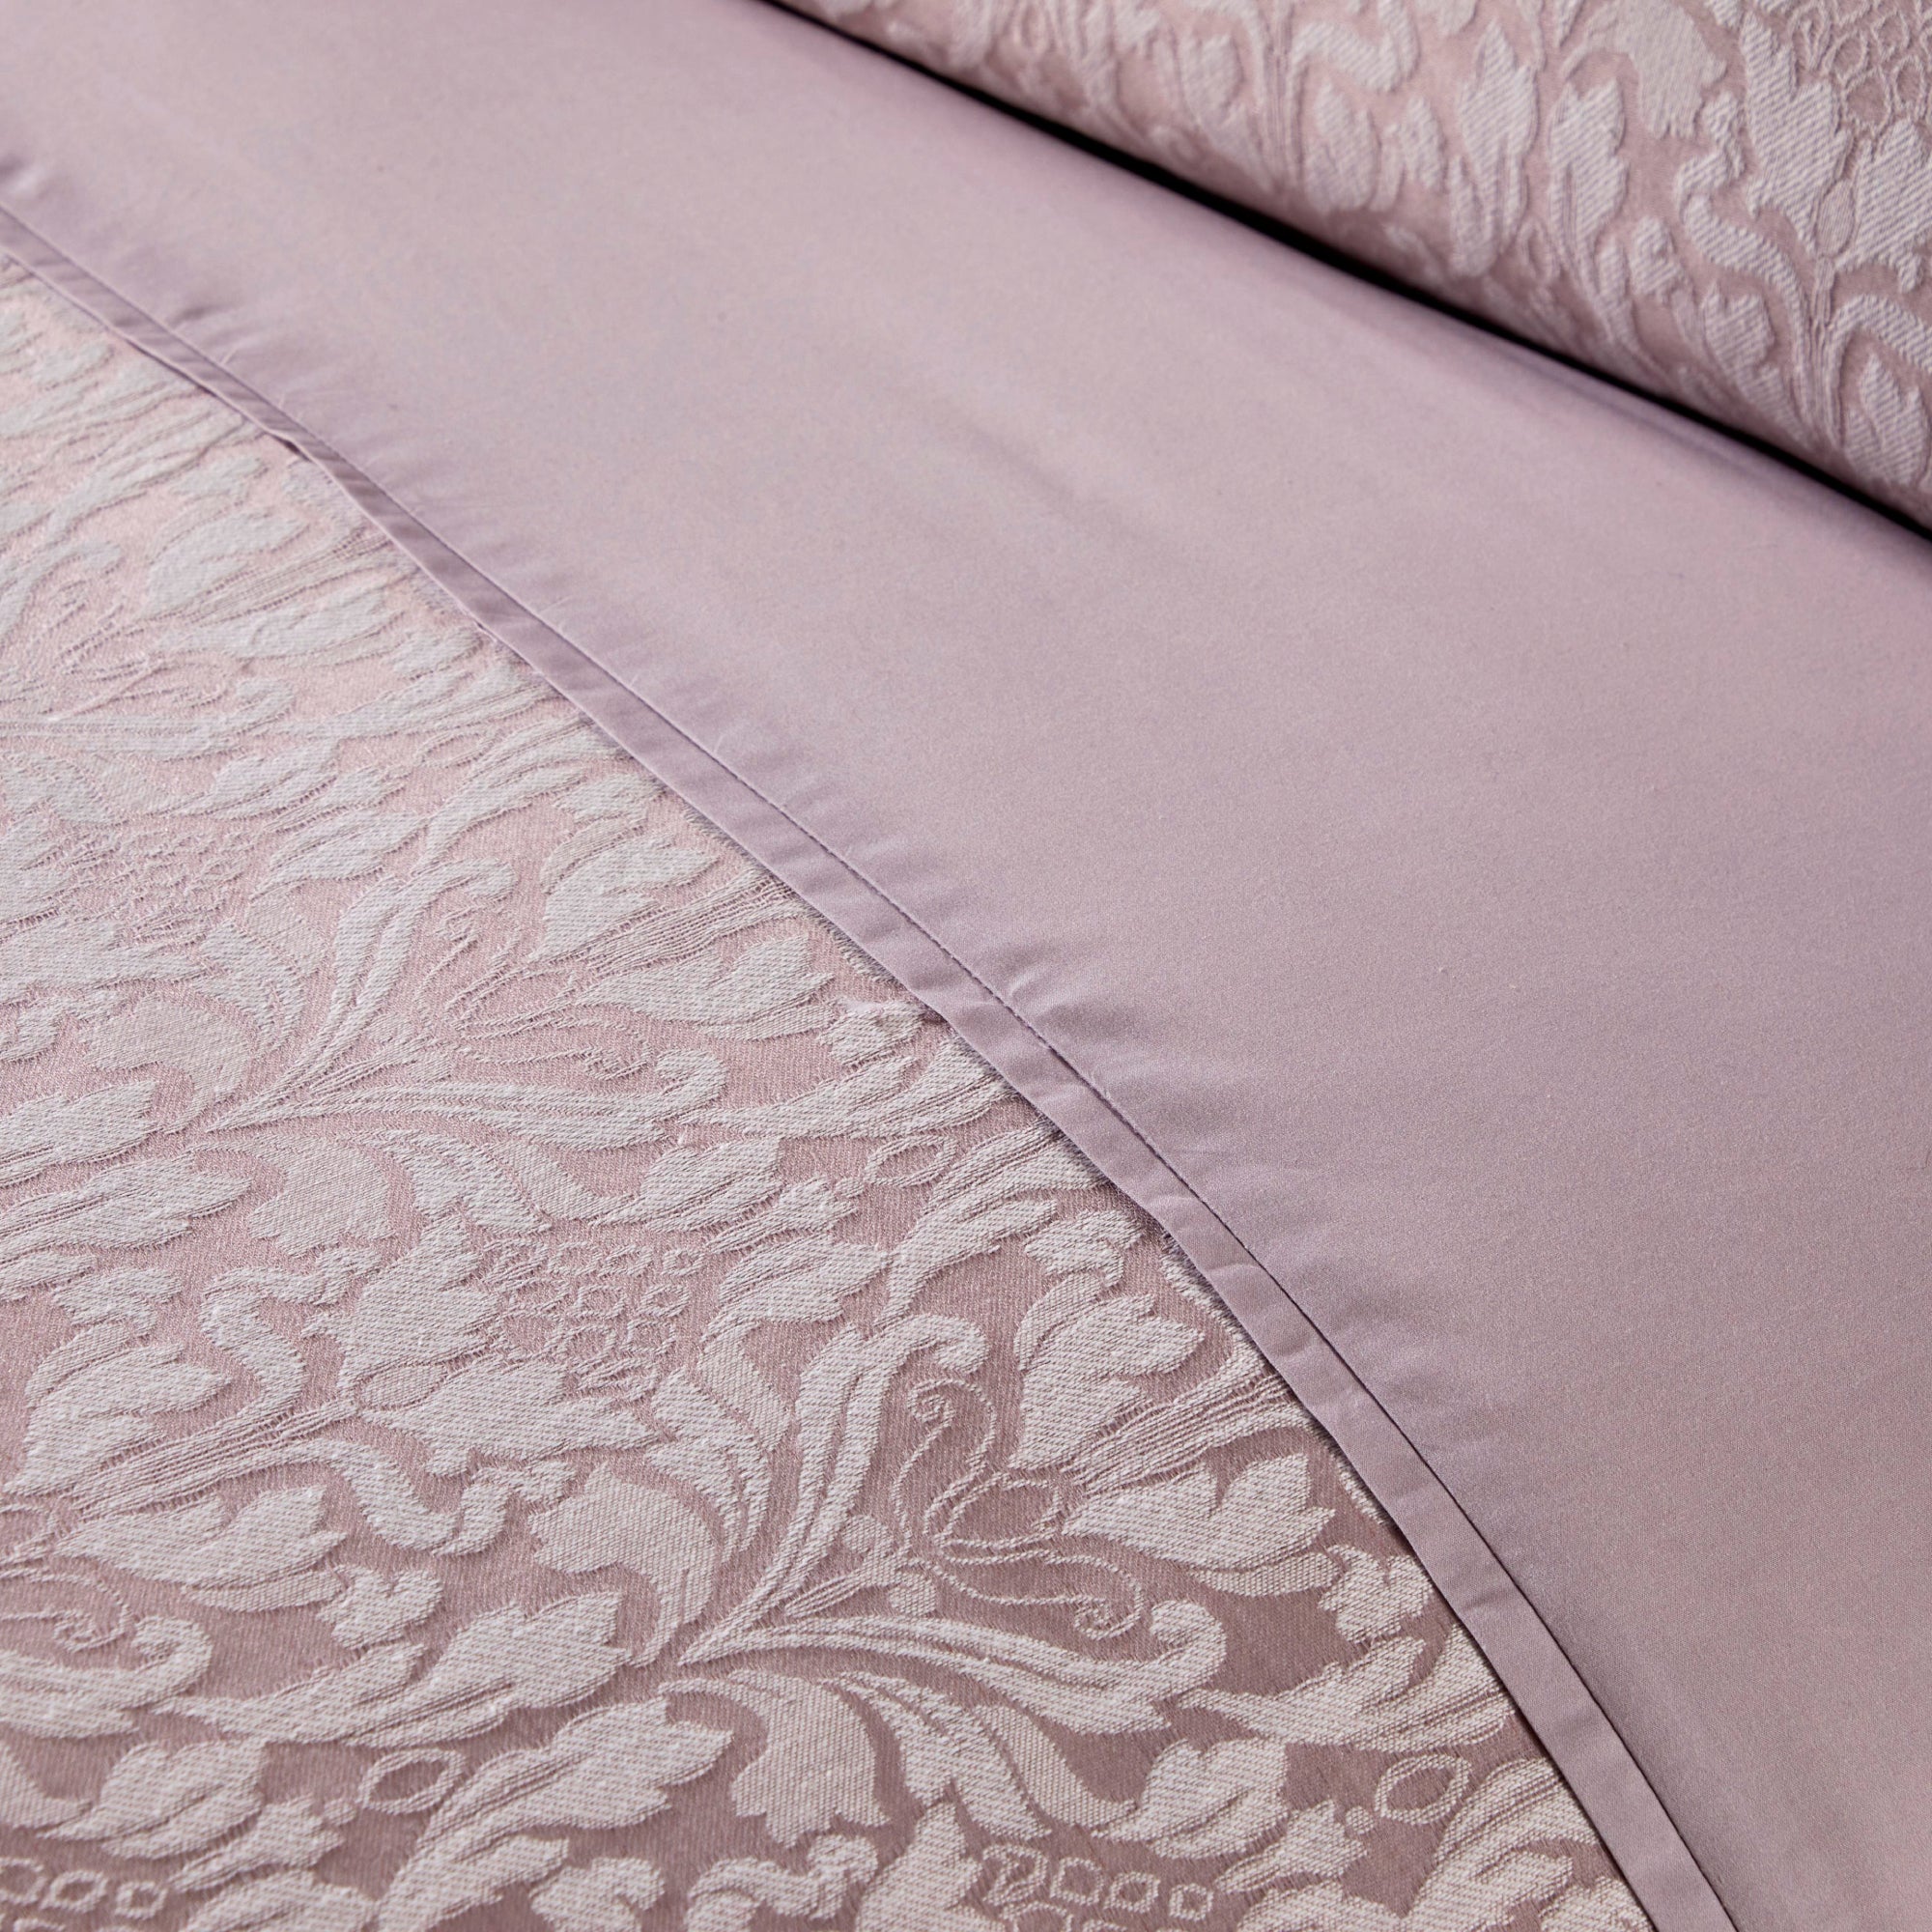 Duvet Cover Set Hawthorne by Dreams & Drapes Woven in Lavender